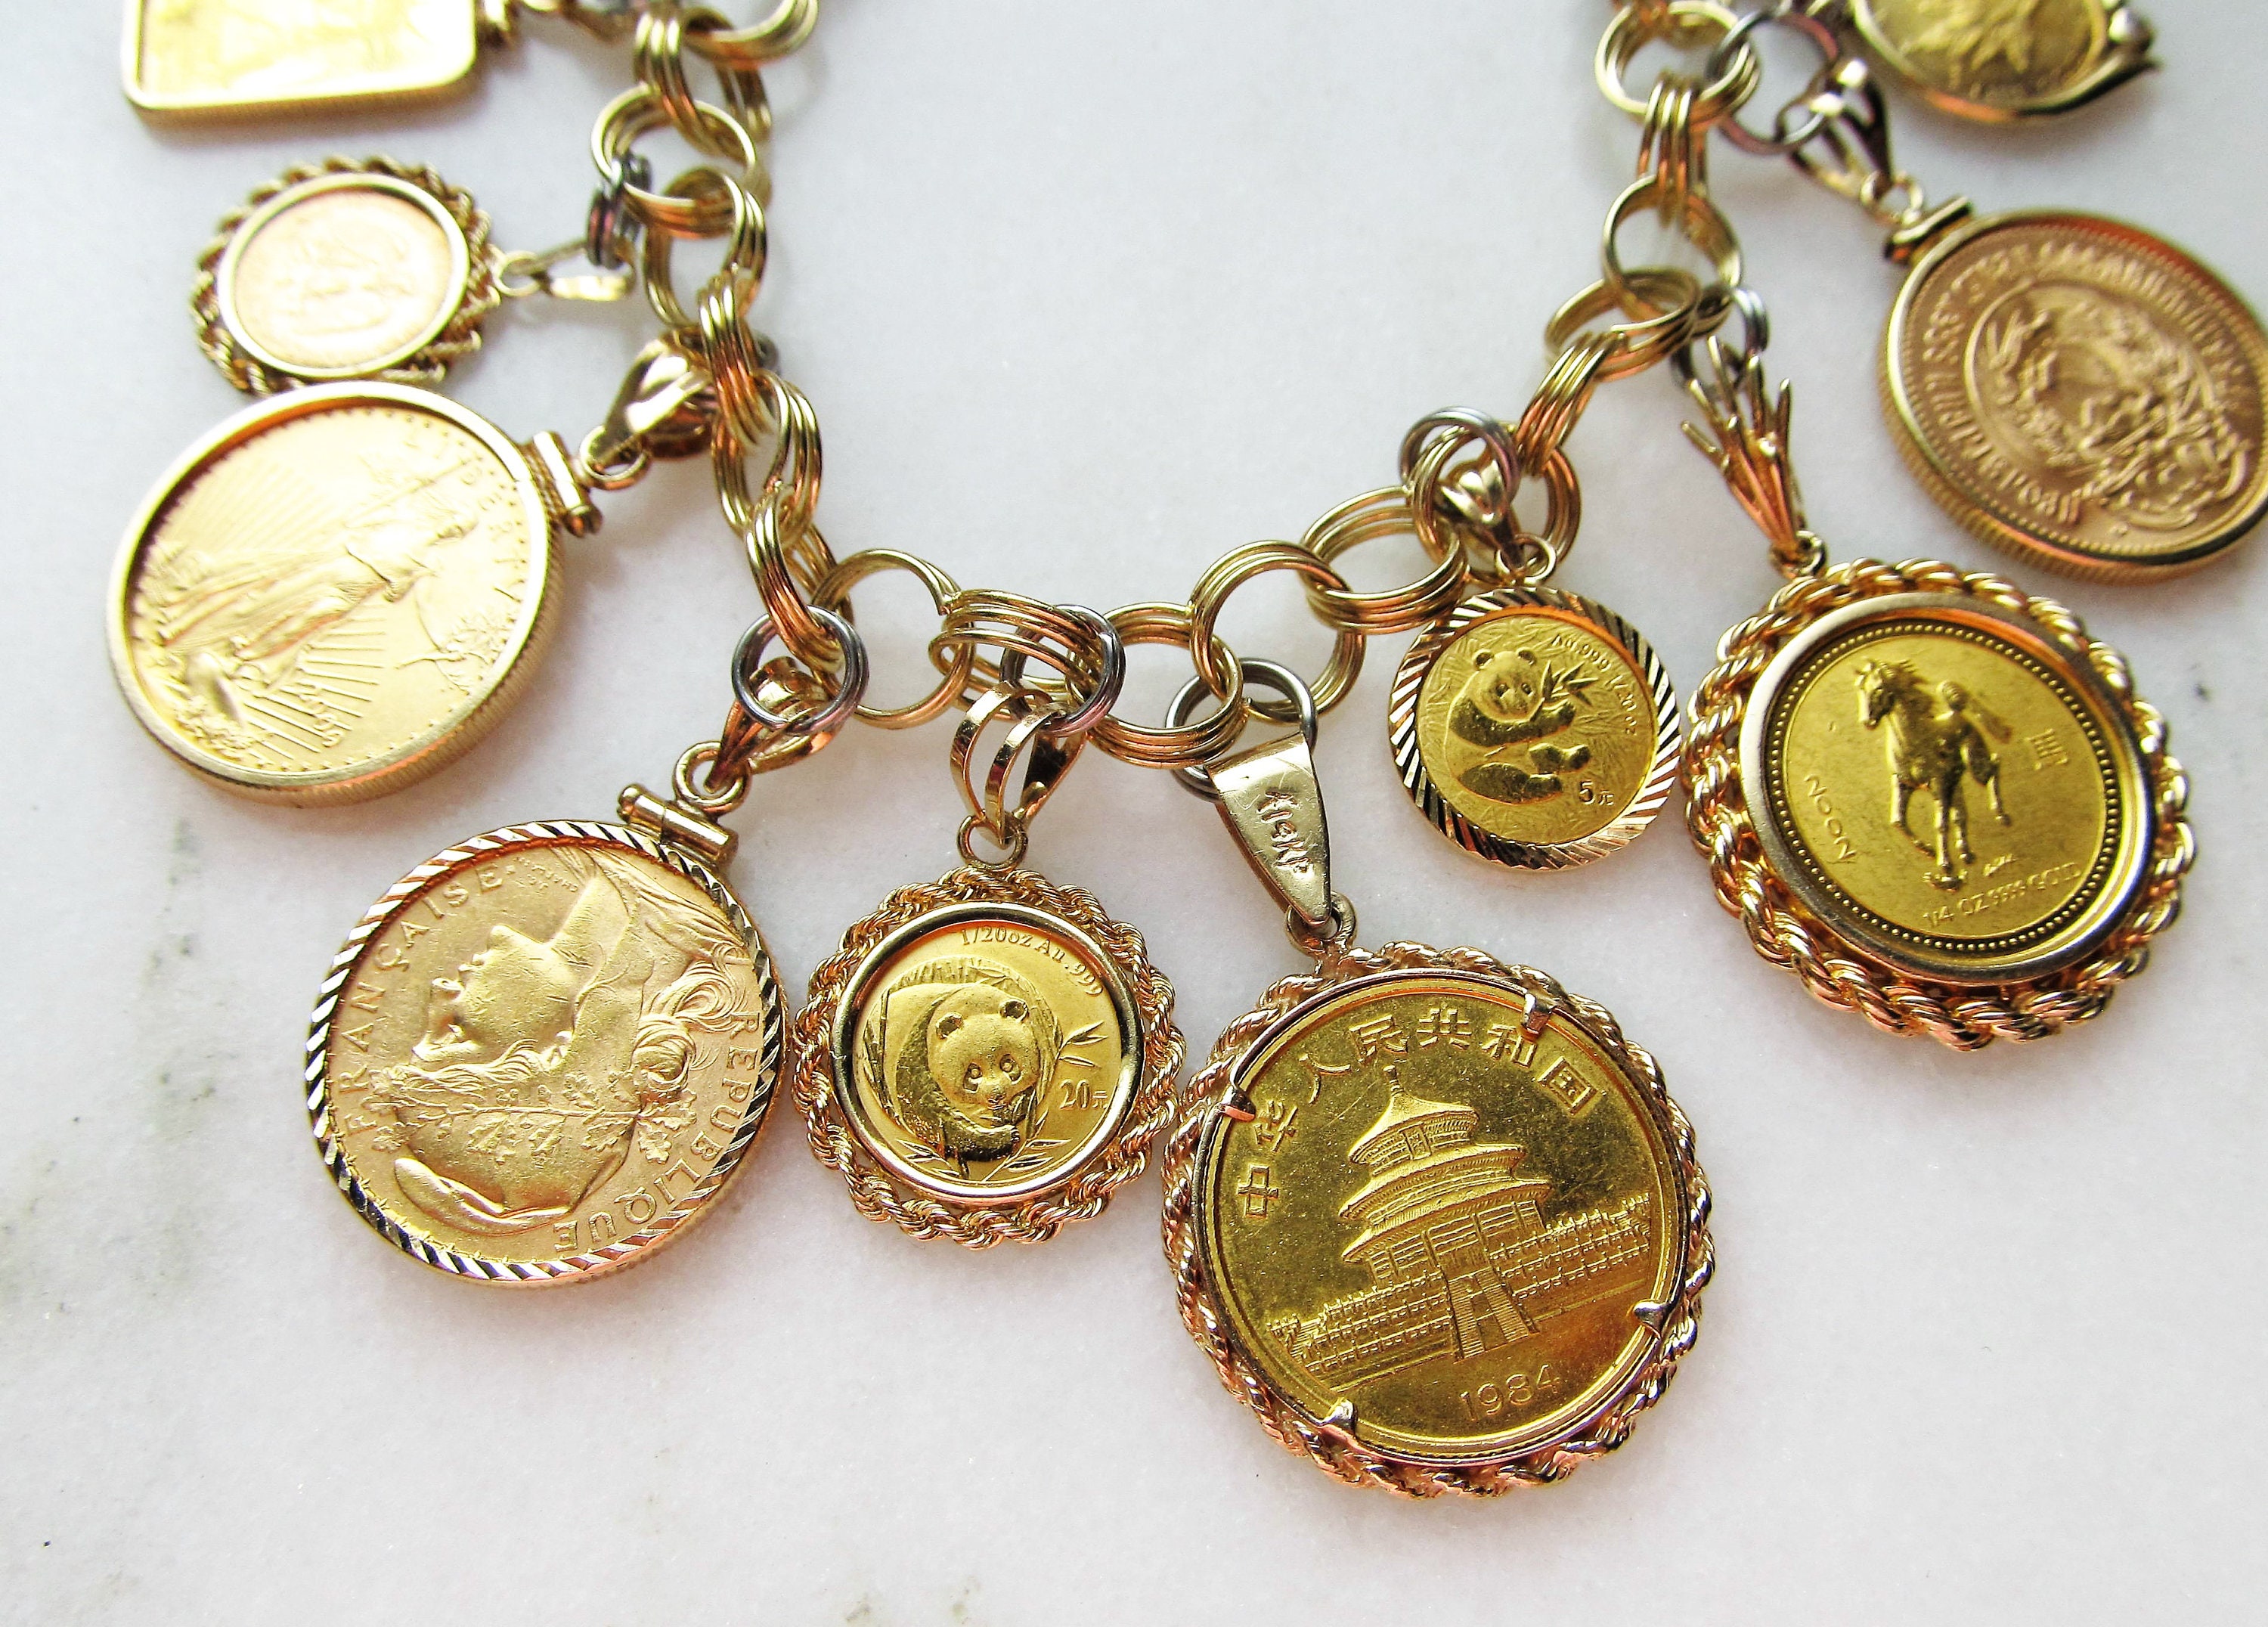 14K Yellow Gold Chunky Coin Charm Bracelet .900.9999 Gold